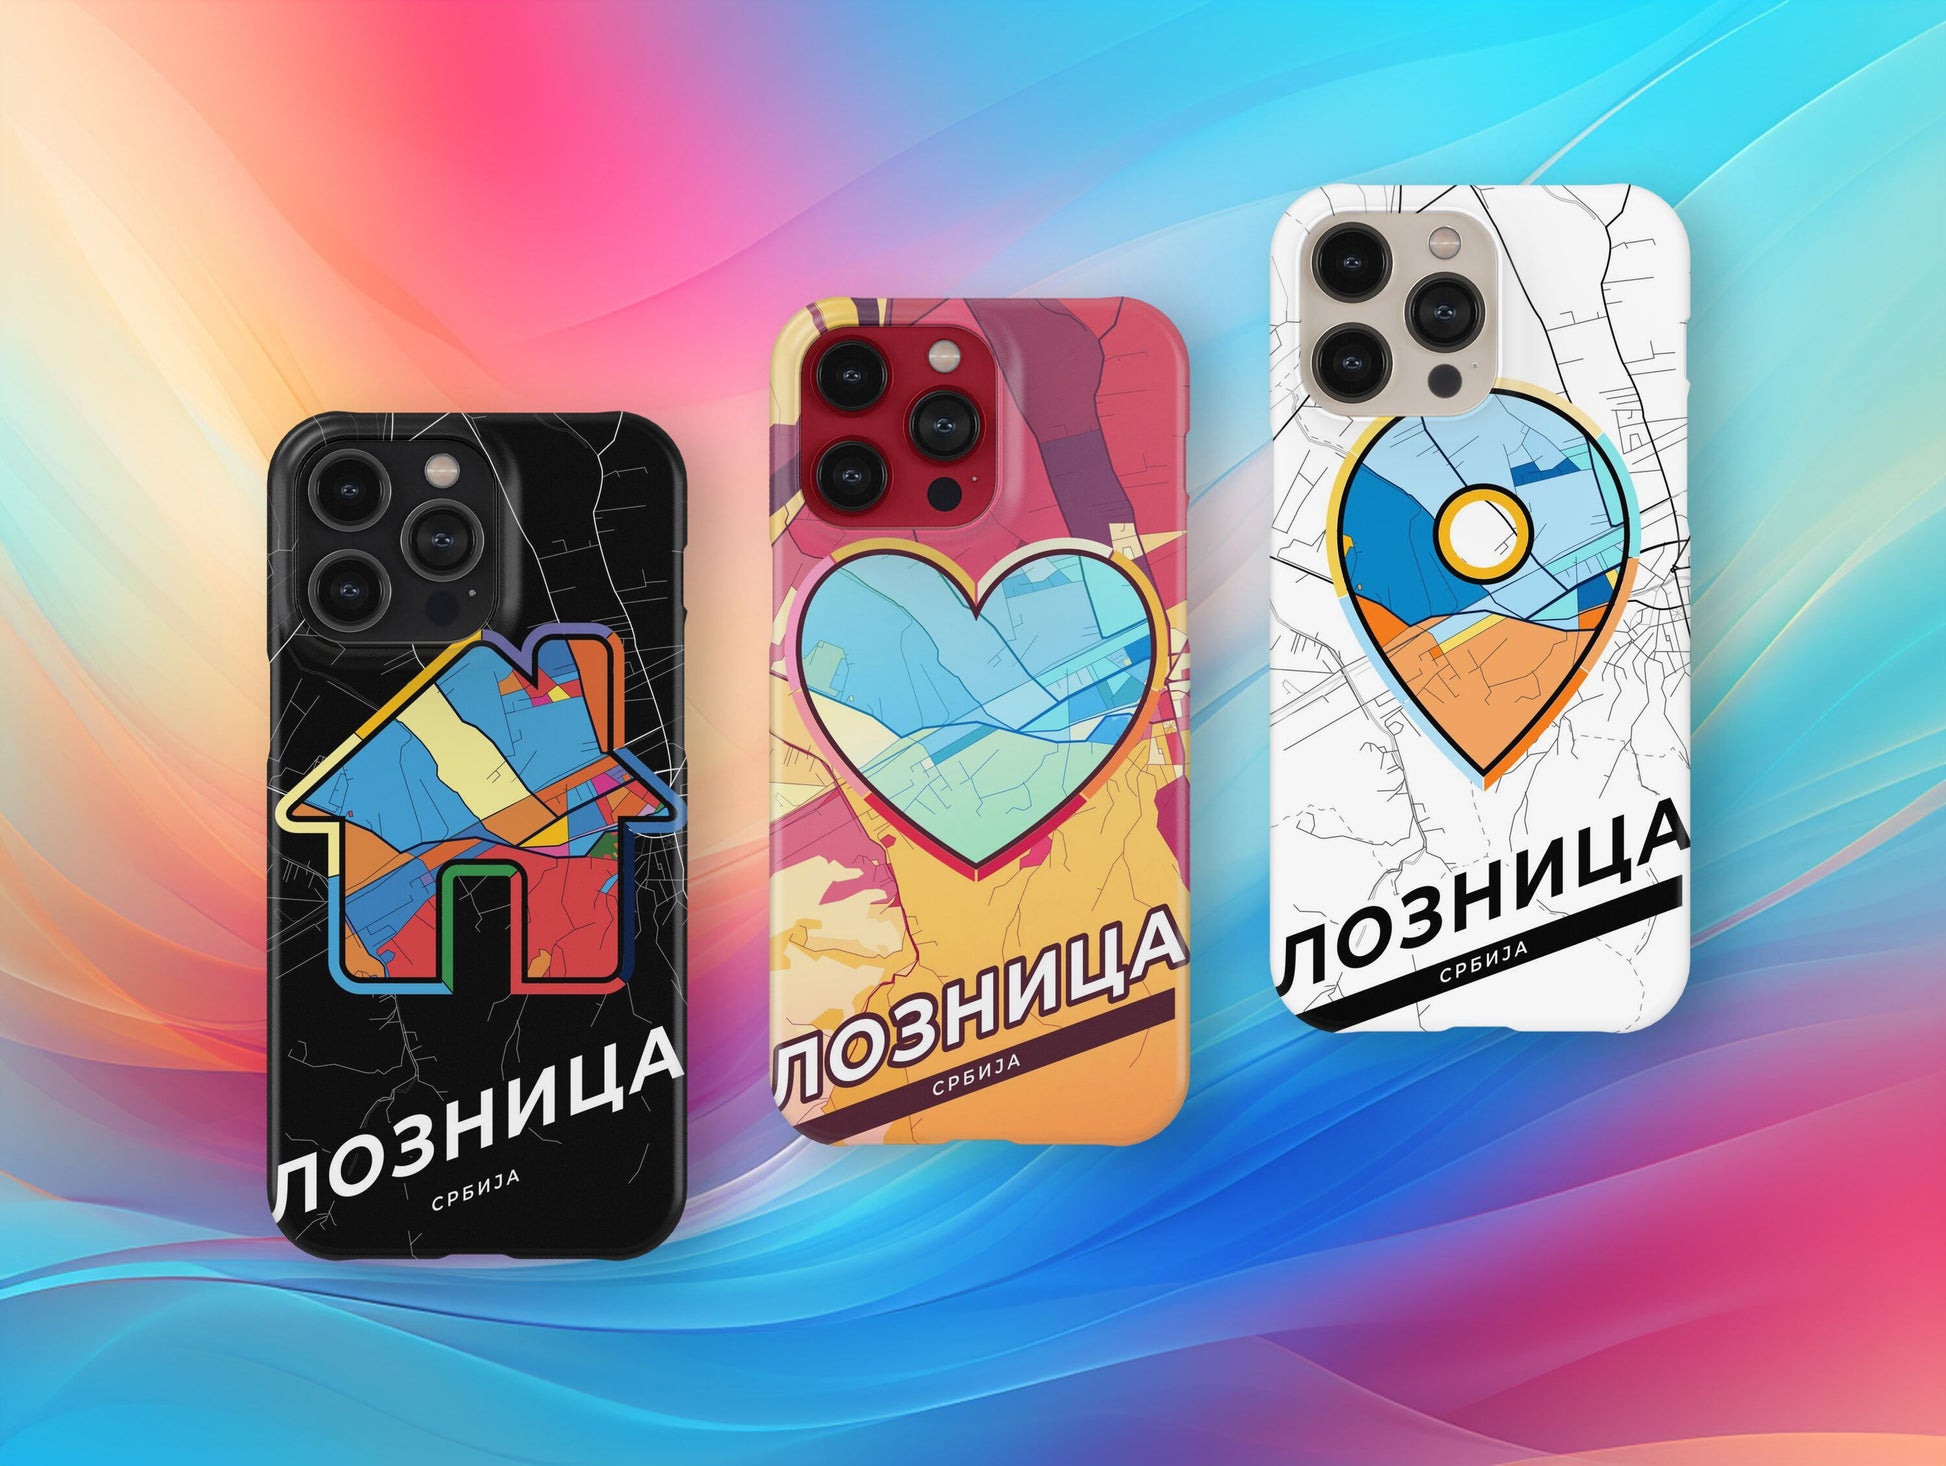 Loznica Serbia slim phone case with colorful icon. Birthday, wedding or housewarming gift. Couple match cases.